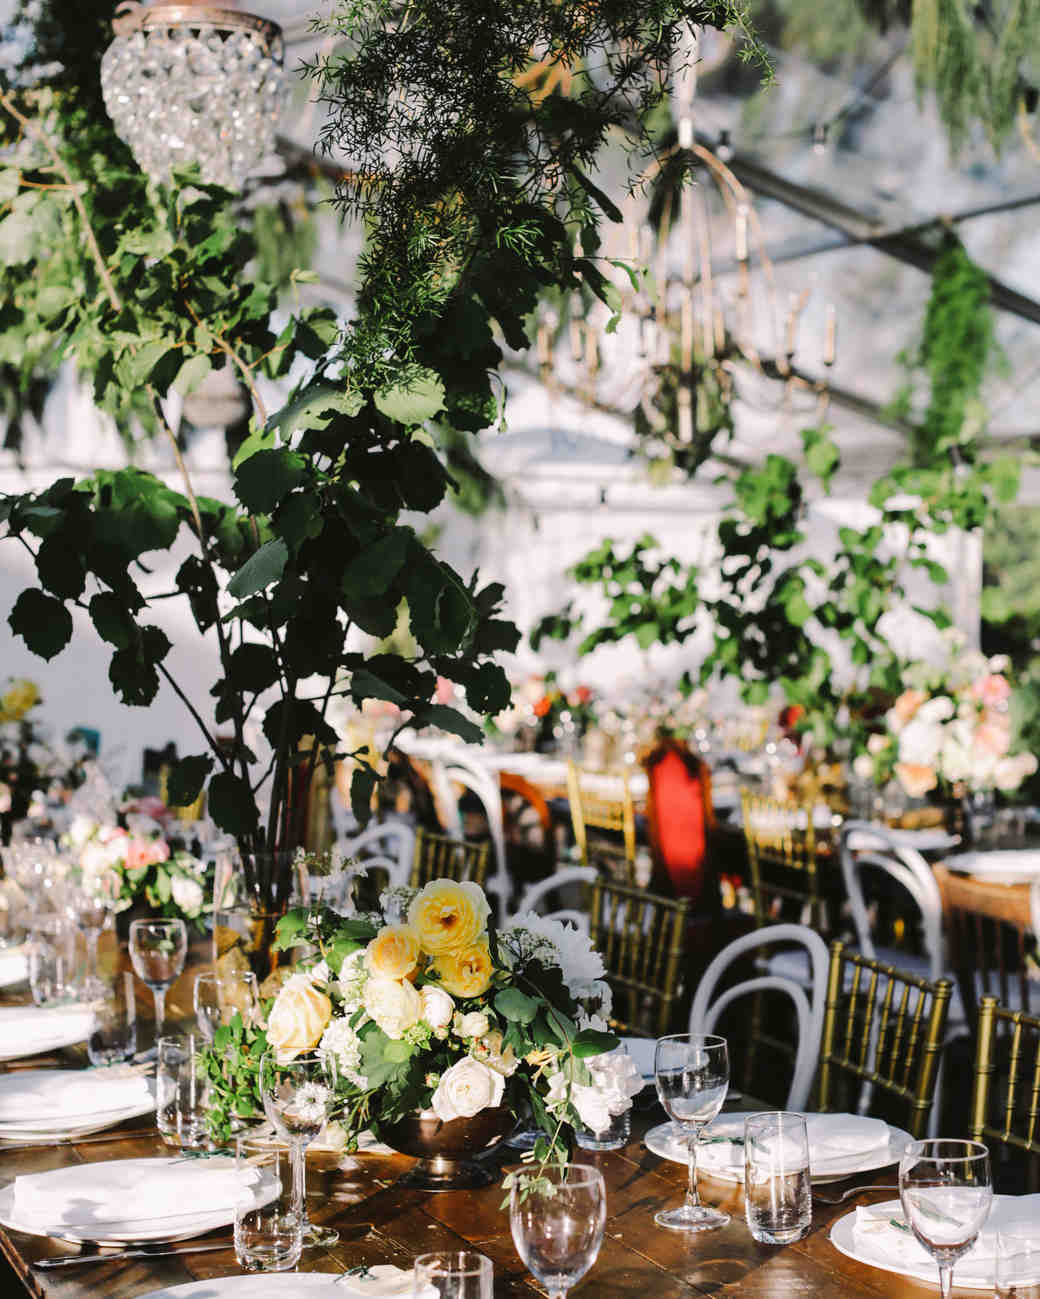 28 Tent Decorating Ideas That Will Upgrade Your Wedding Reception